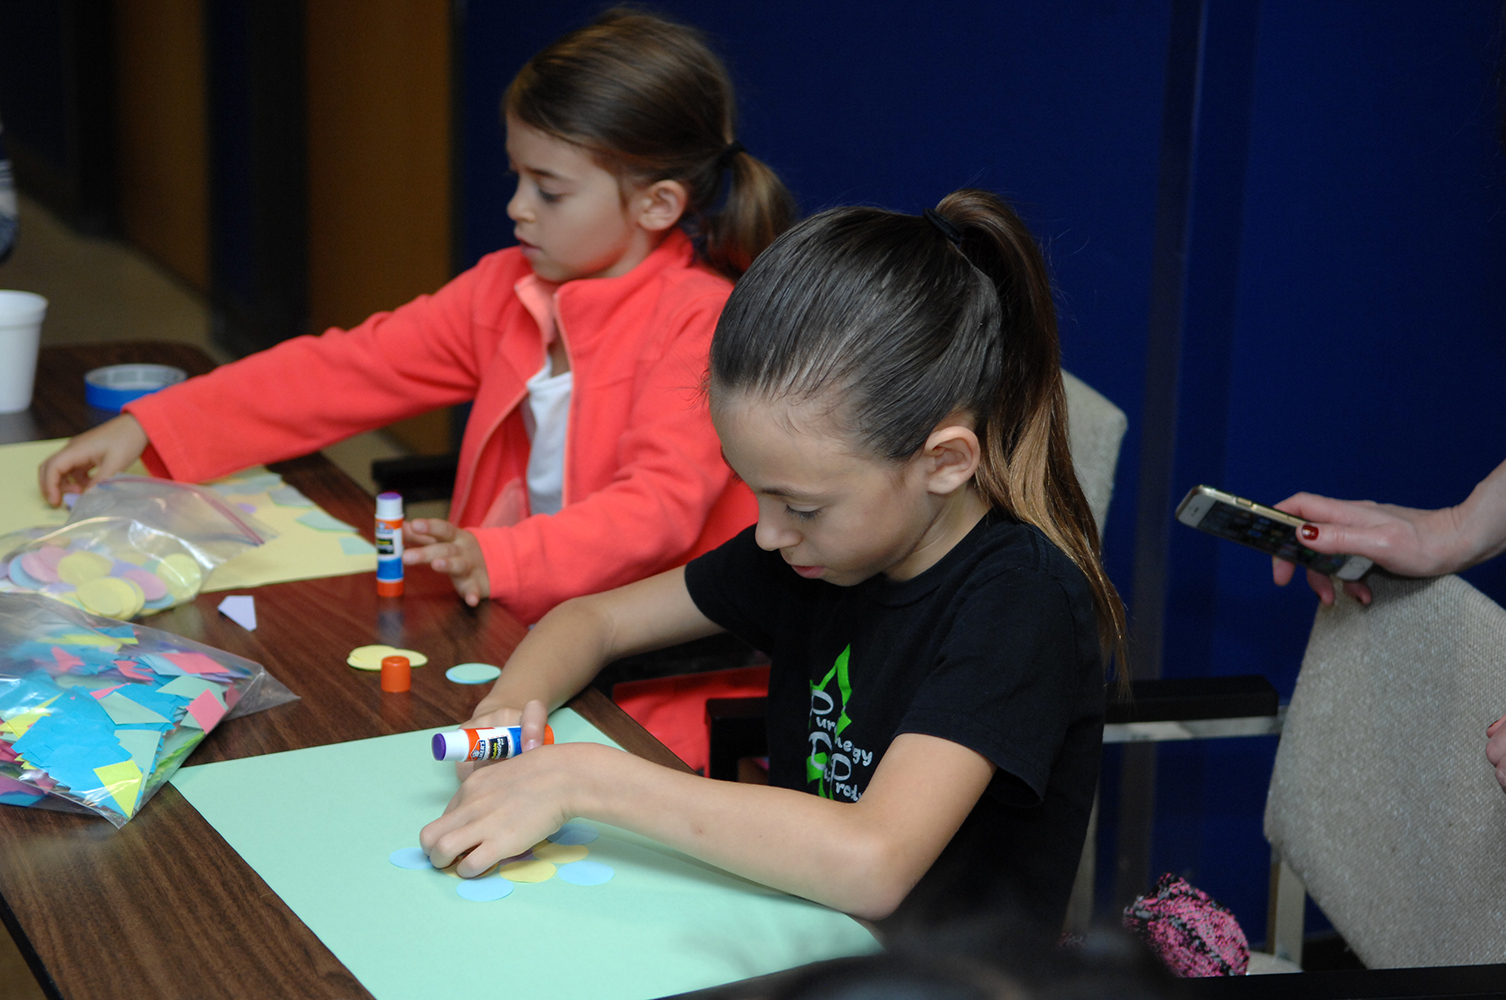 Two young female children complete a construction paper activity at the Texas A&M Mathematics and Statistics Fair